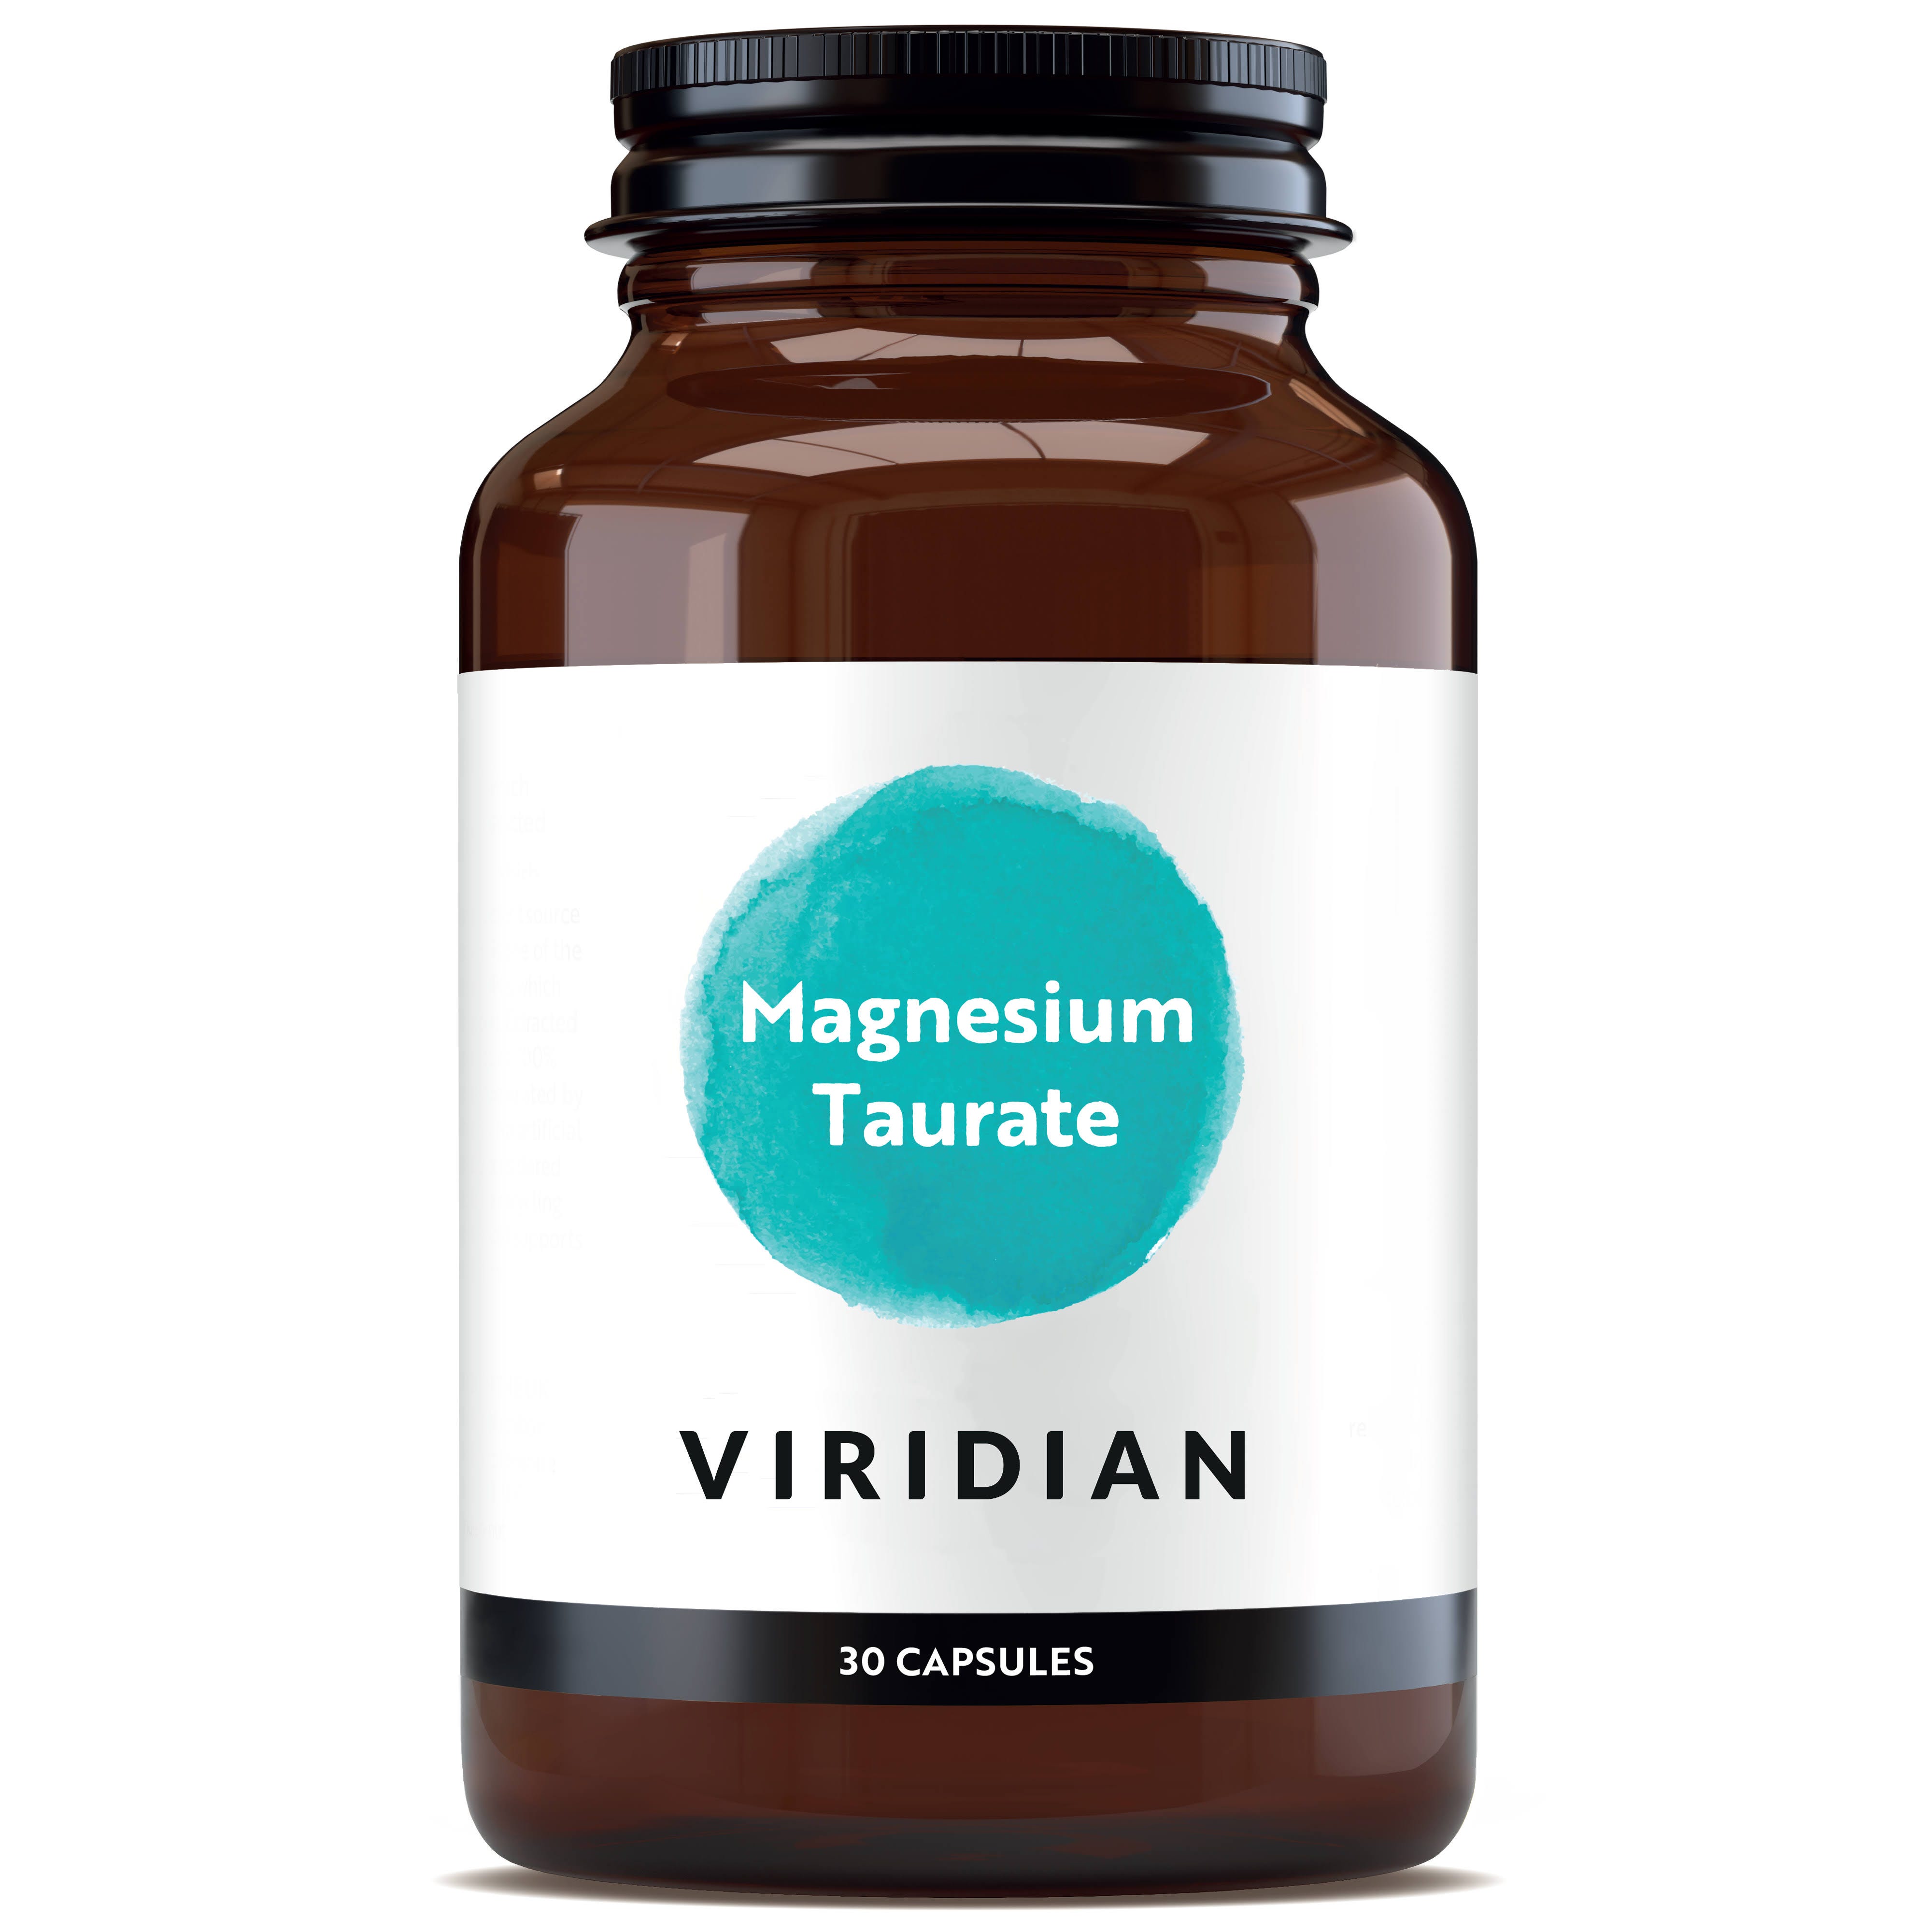 Viridian Magnesium Taurate Capsules: Enhance Wellbeing with Essential Minerals | Image